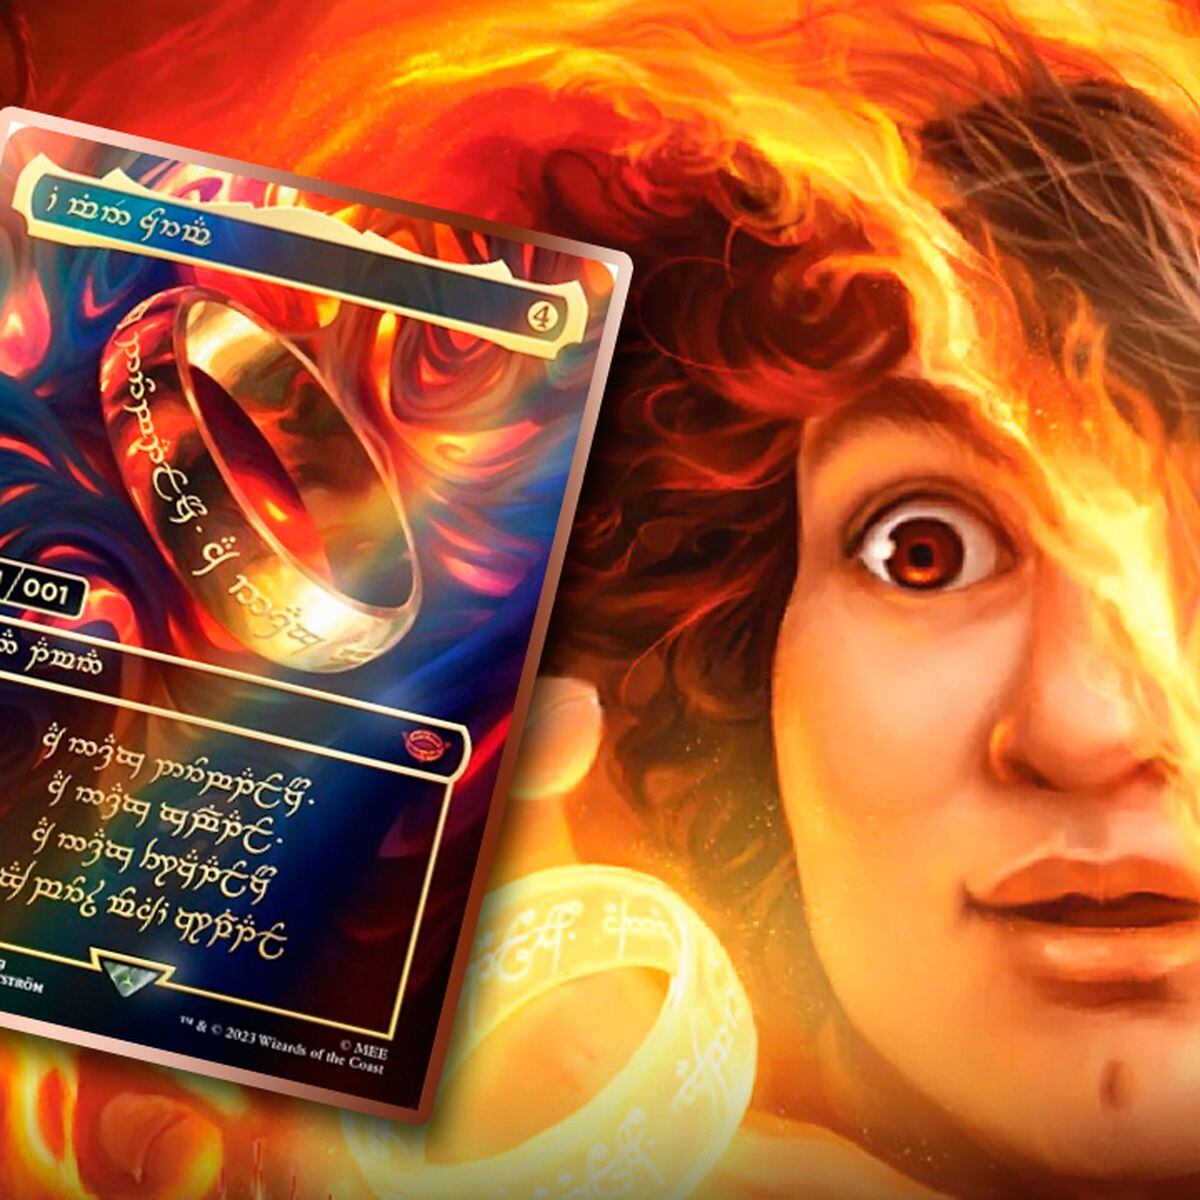 Magic the Gathering's “One Ring” unique card, worth over 2 million dollars,  has been found - Meristation